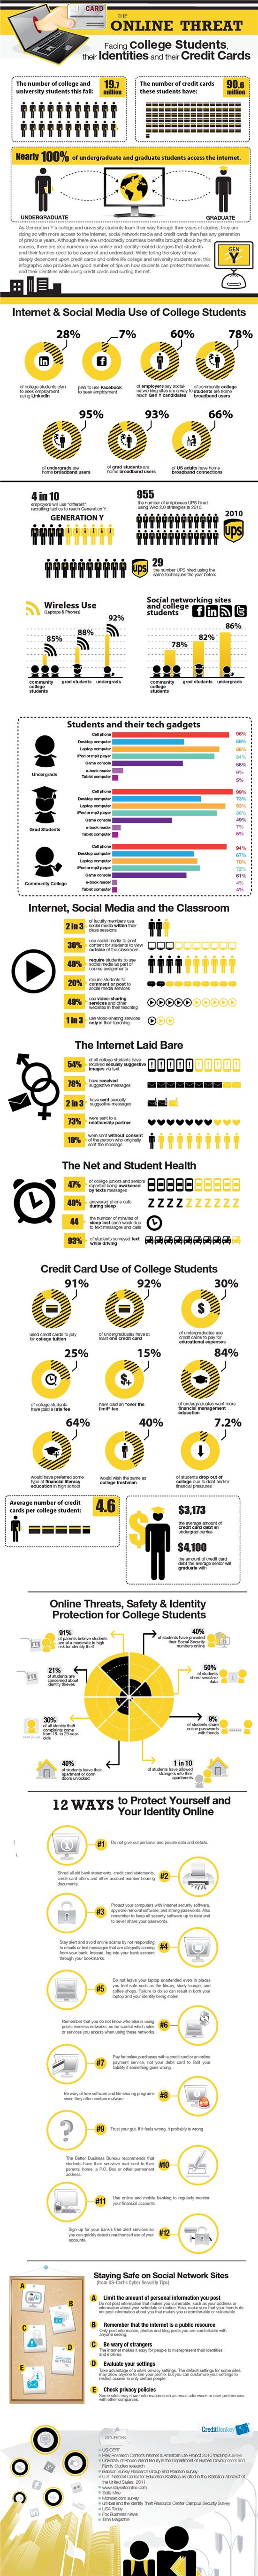 Internet Safety: Online Threat Facing College Students, Identities and Credit Cards